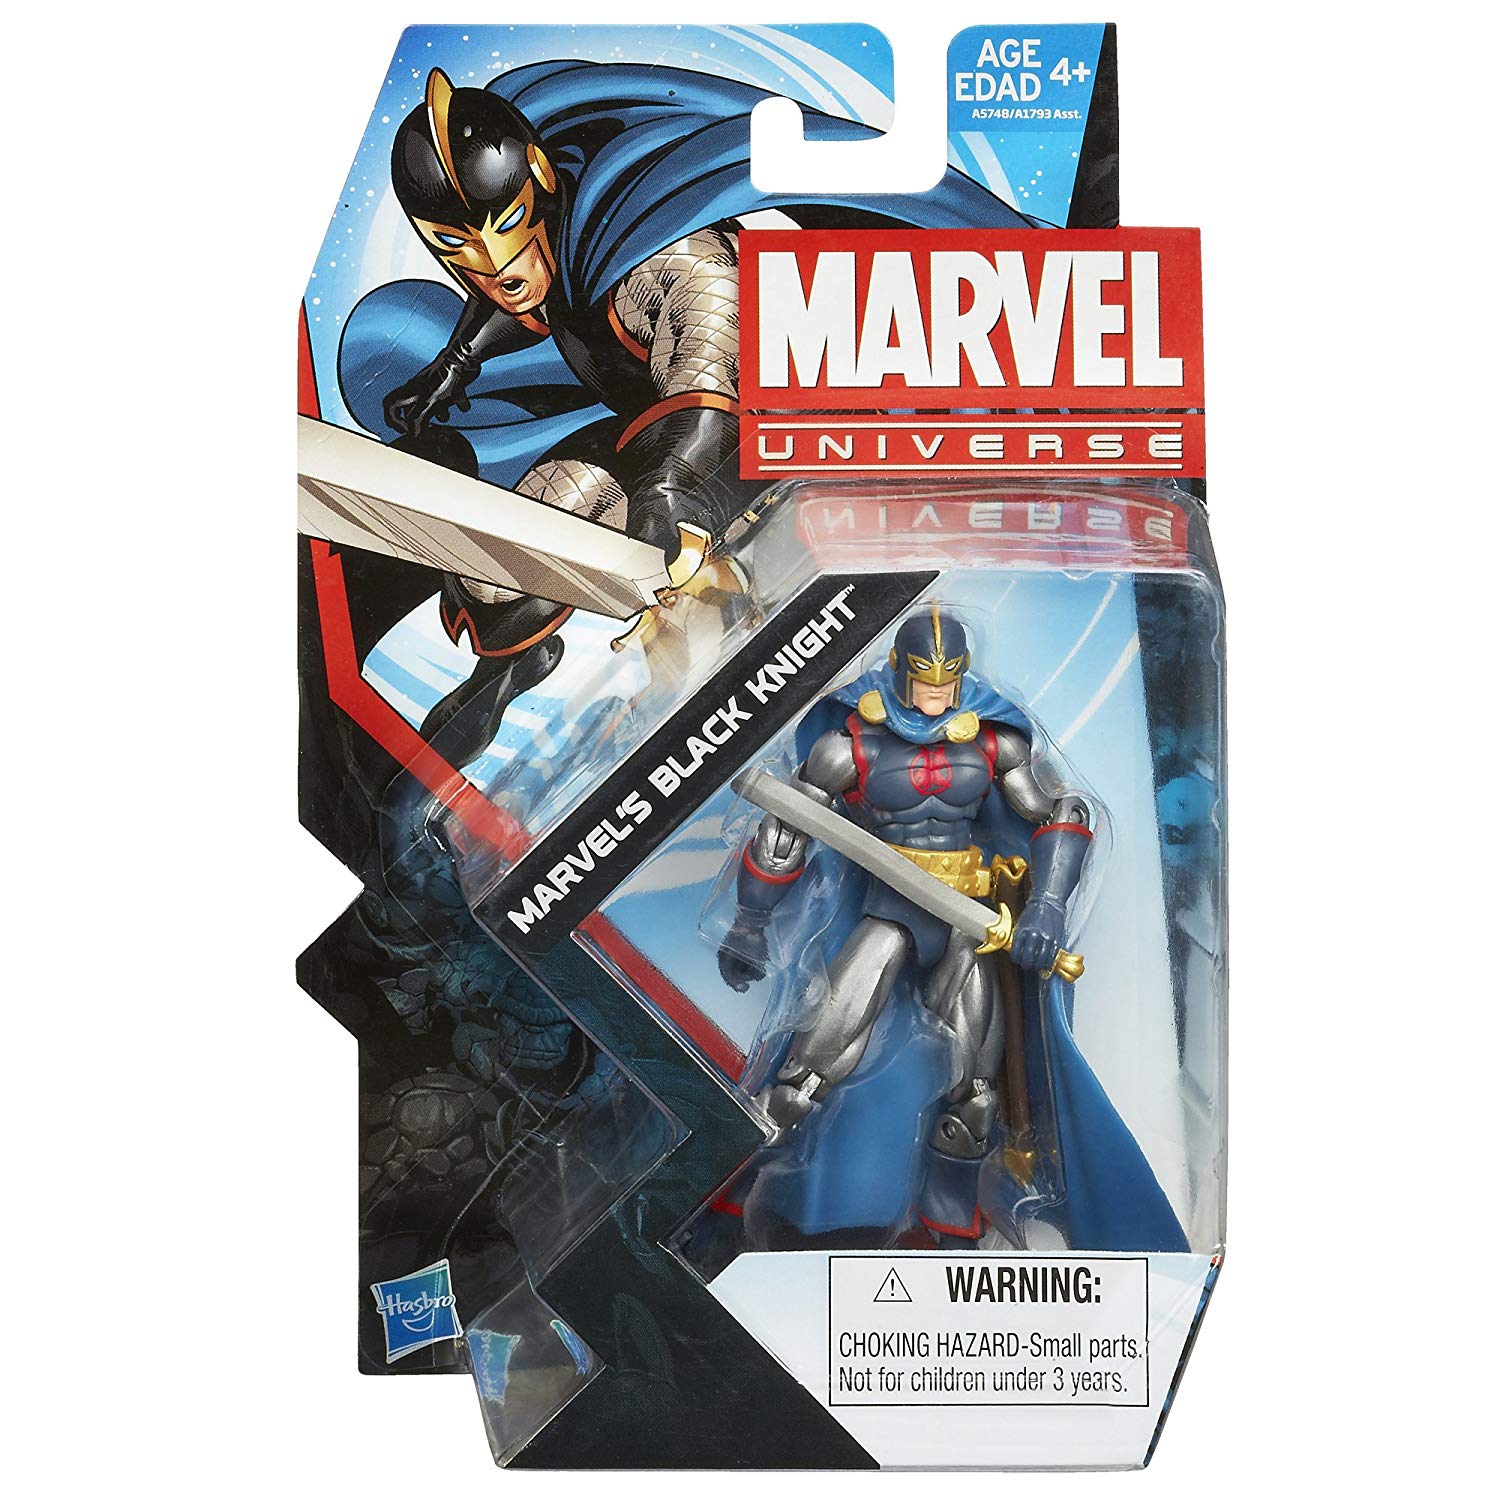 Marvel Universe Series Black Knight 3.75 inch Action Figure 1